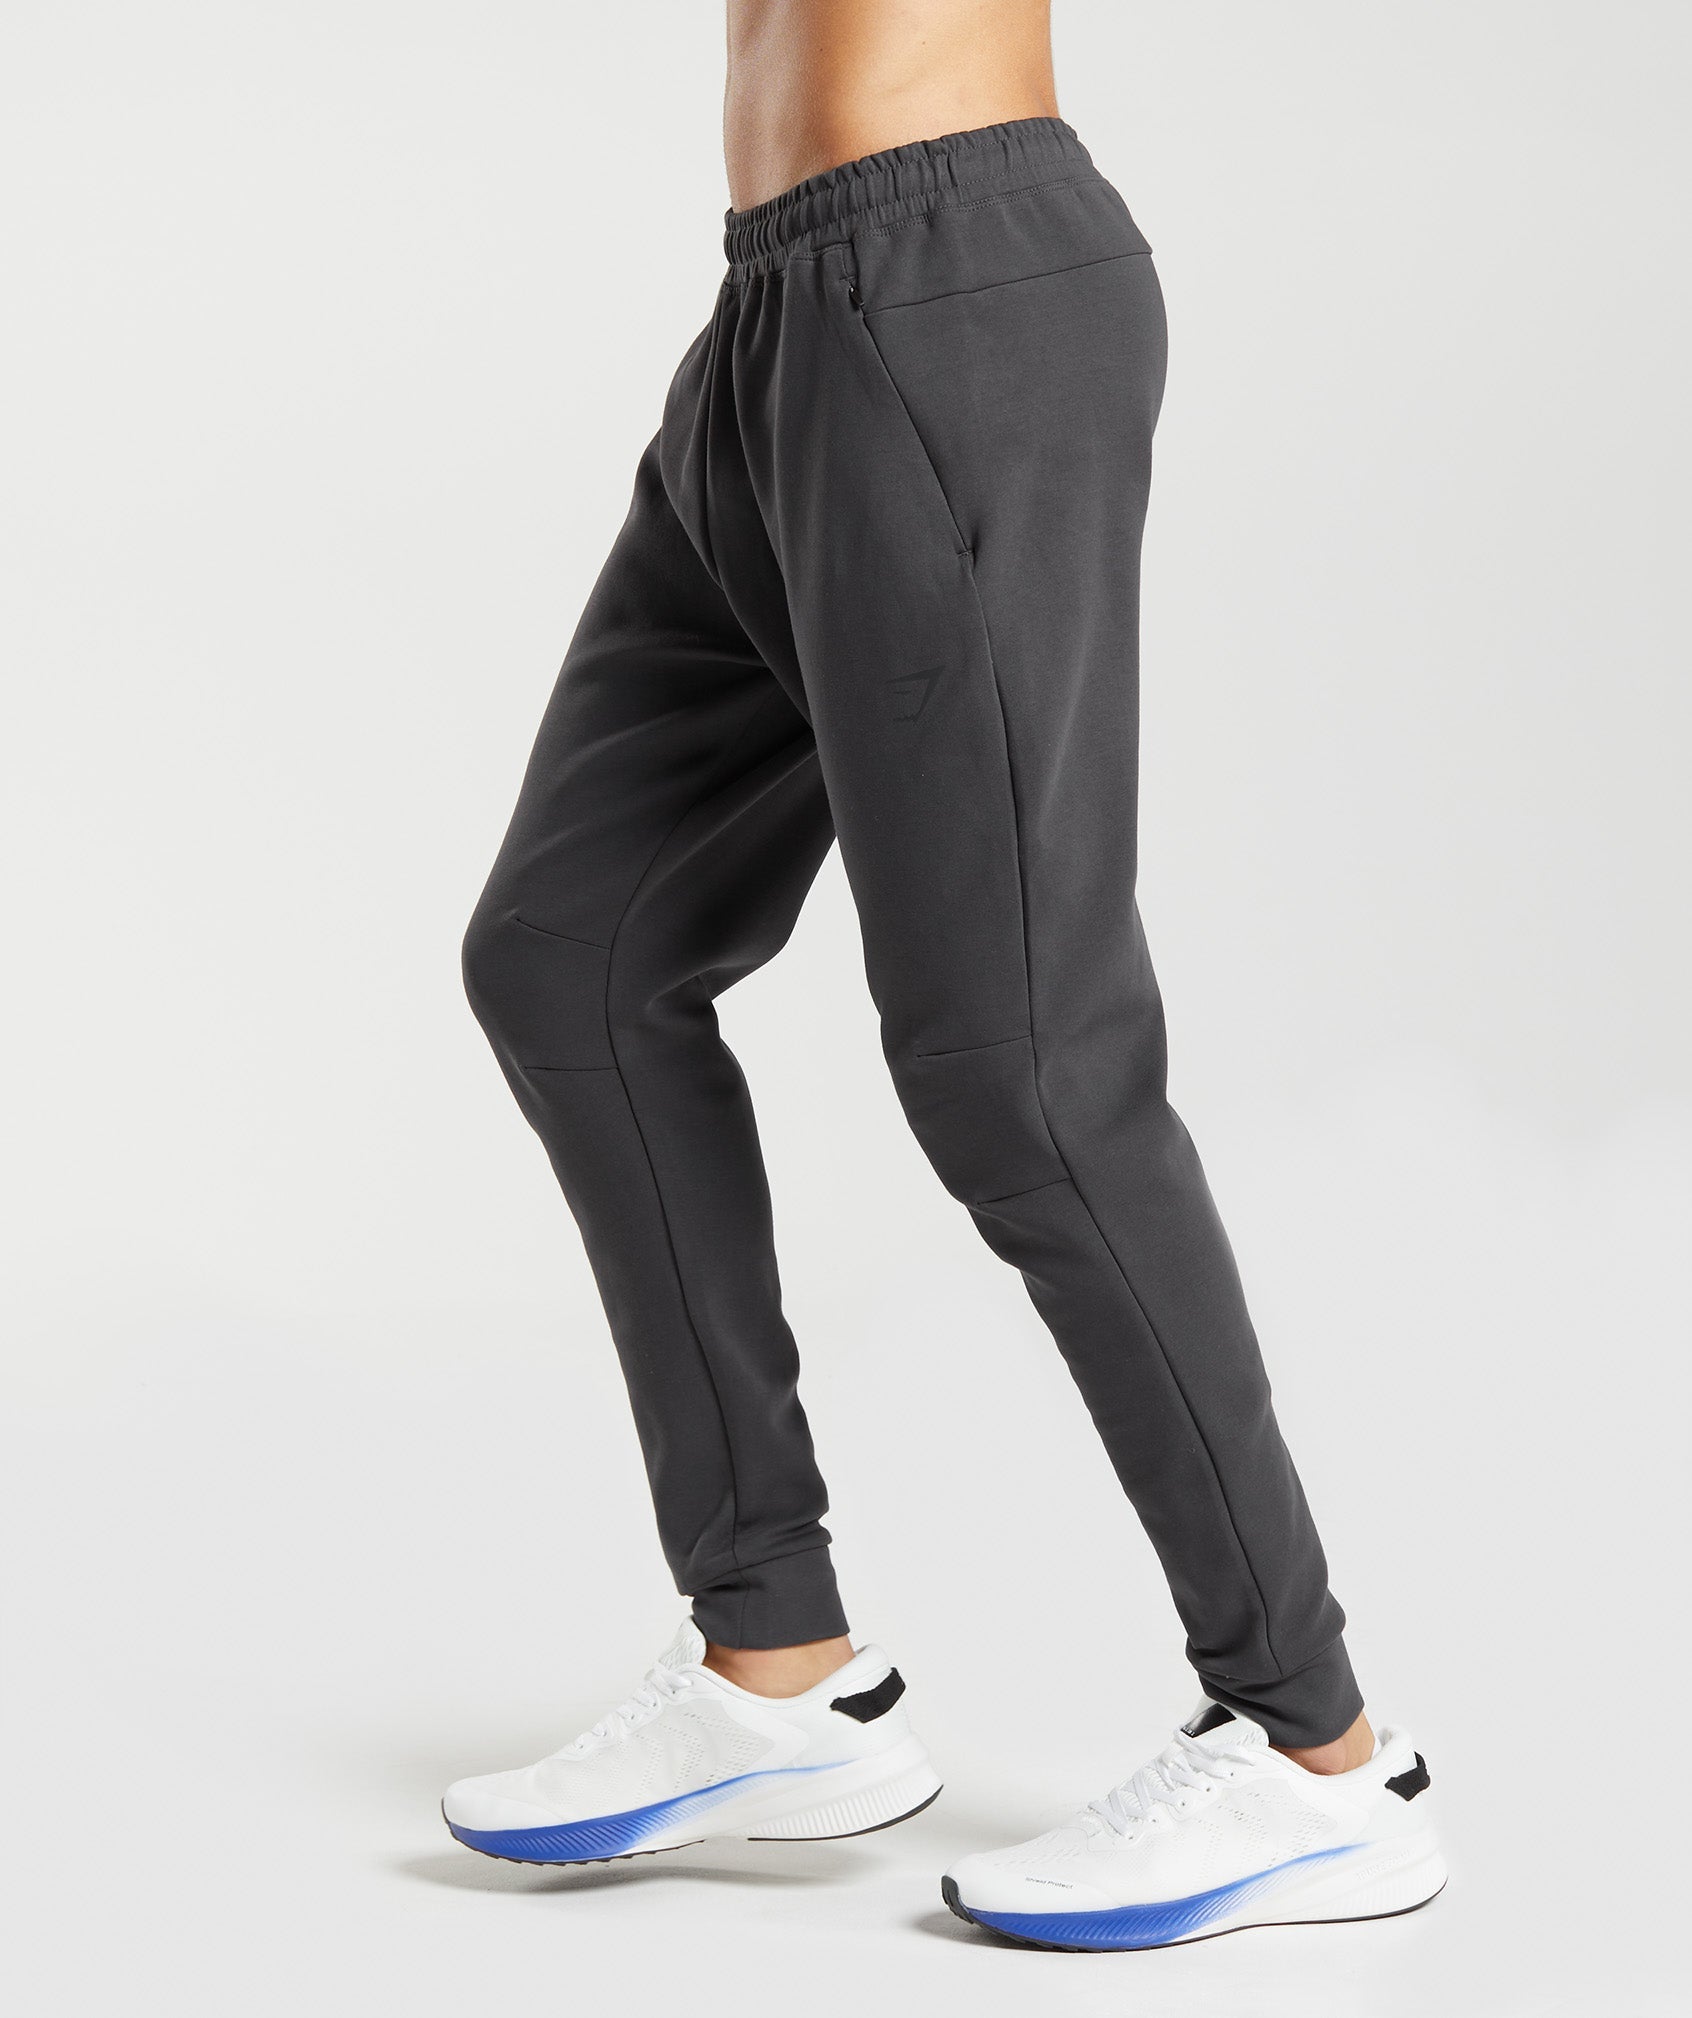 Rest Day Knit Joggers in Onyx Grey - view 3